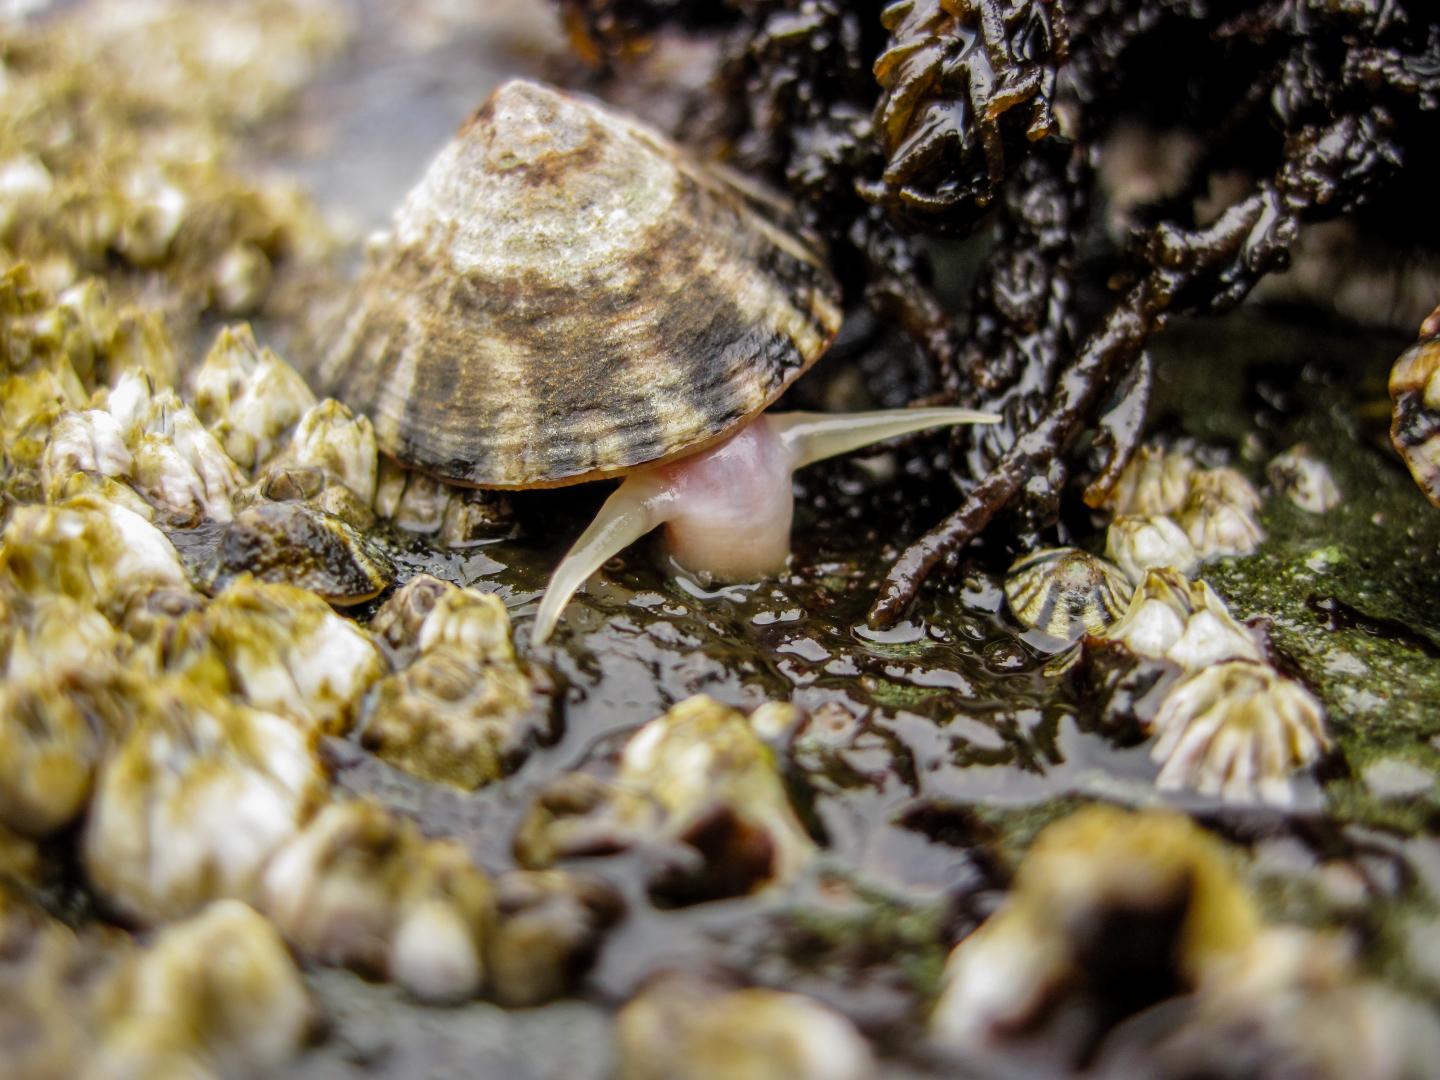 Limpet at the Intertidal Zone